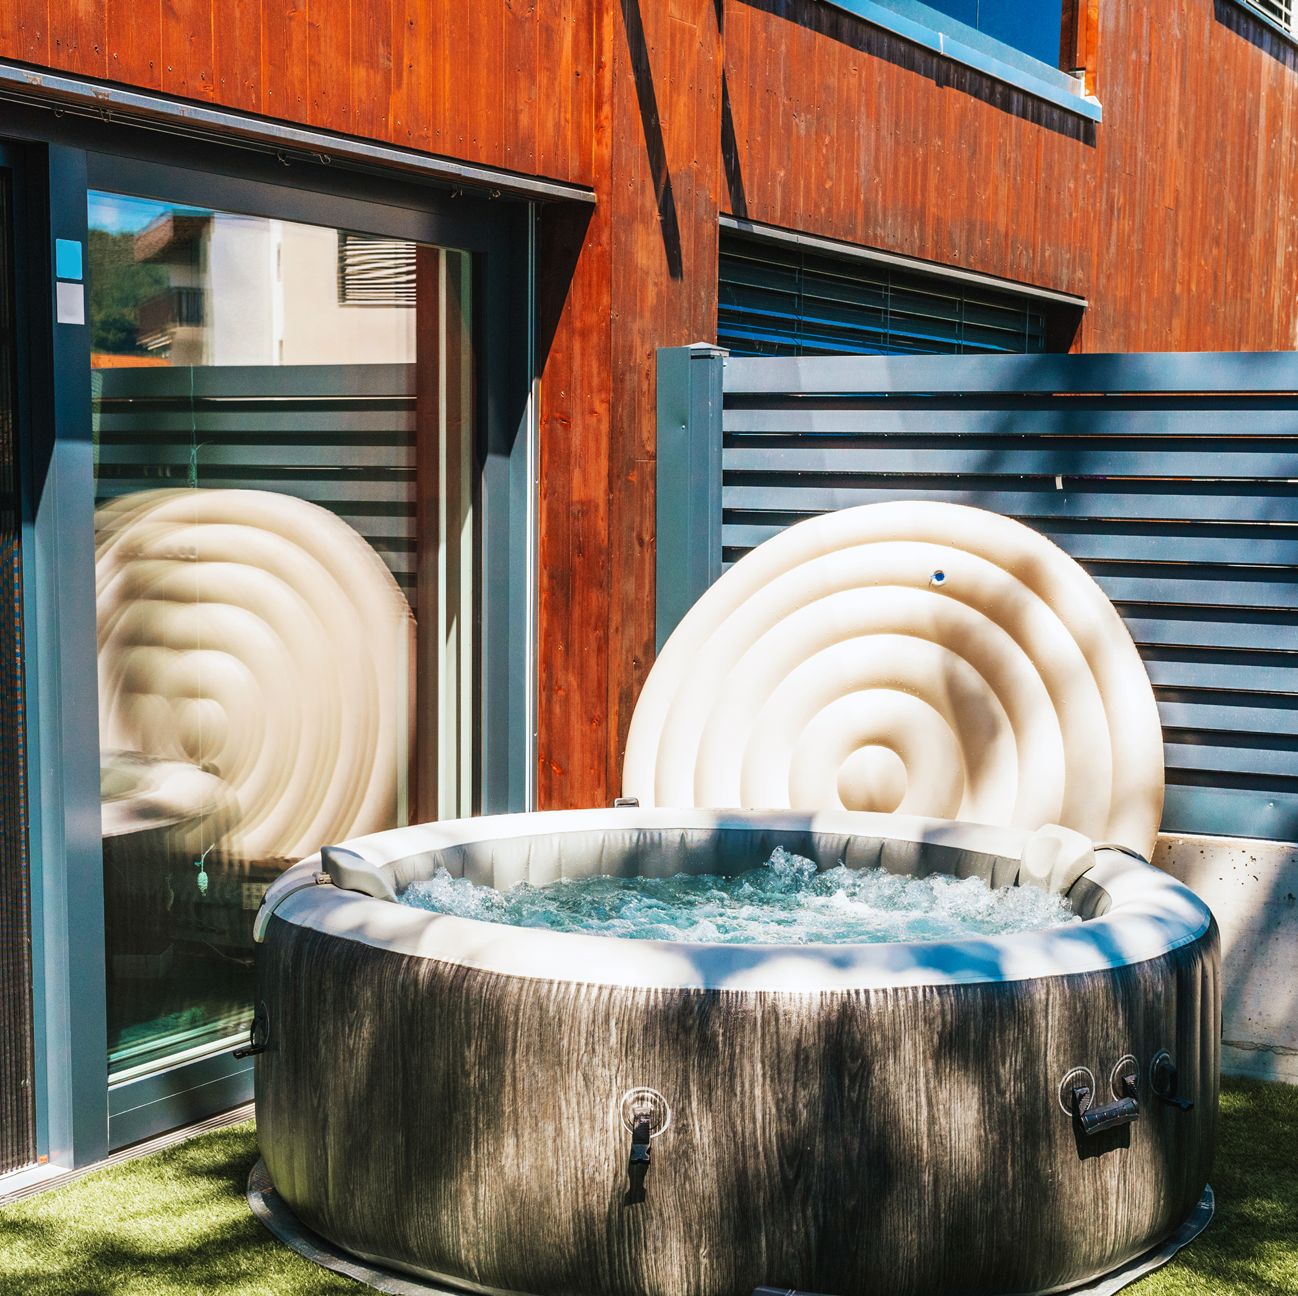 Bliss Out in Your Backyard With One of These Affordable Inflatable Hot Tubs